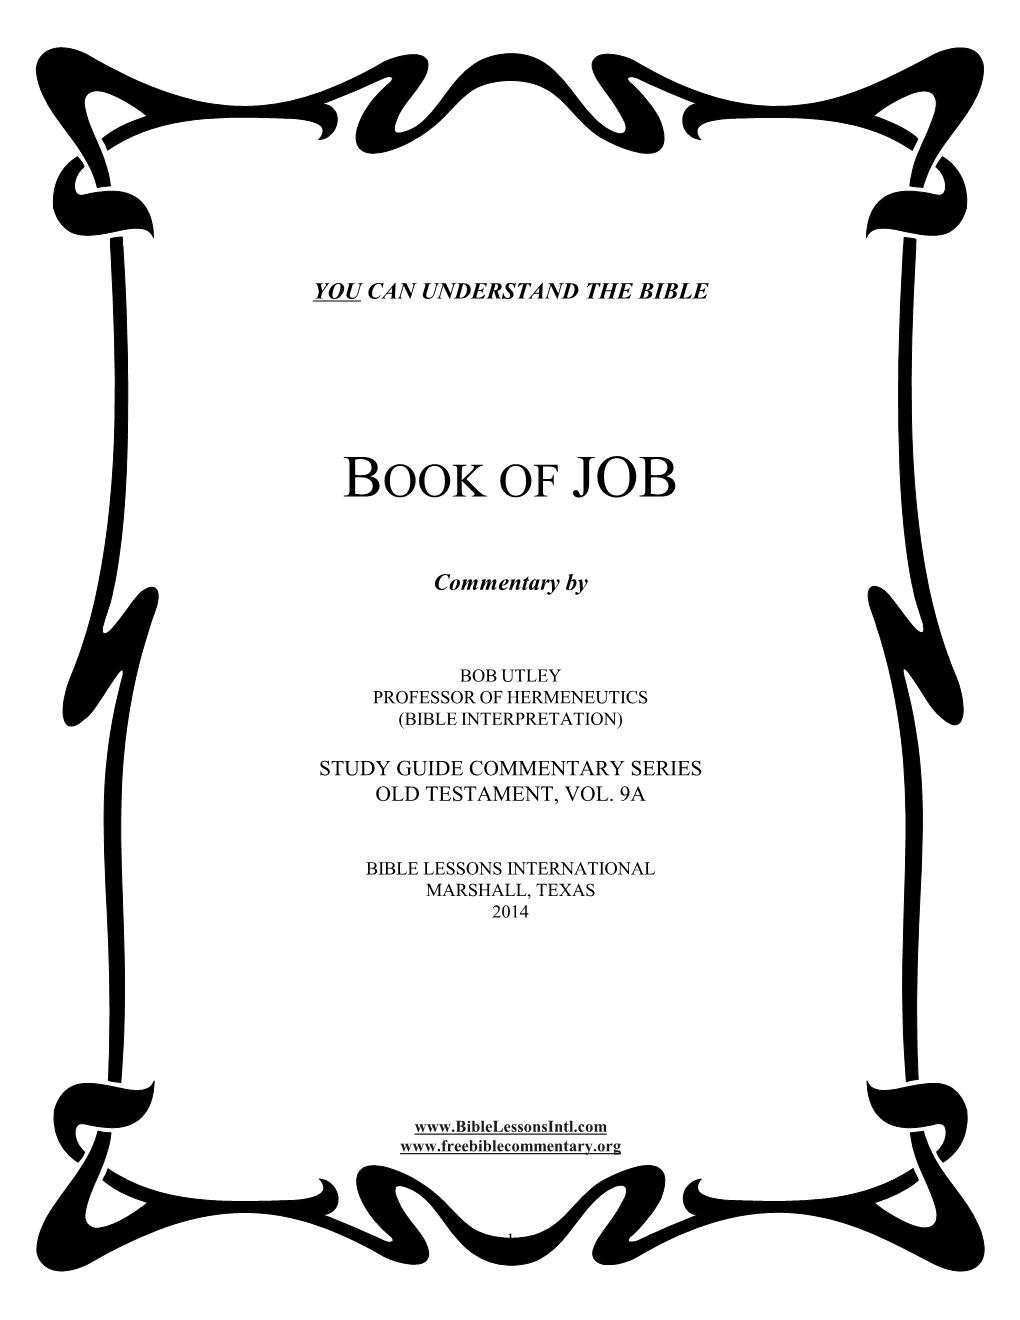 BOOK of JOB Bible Commentary